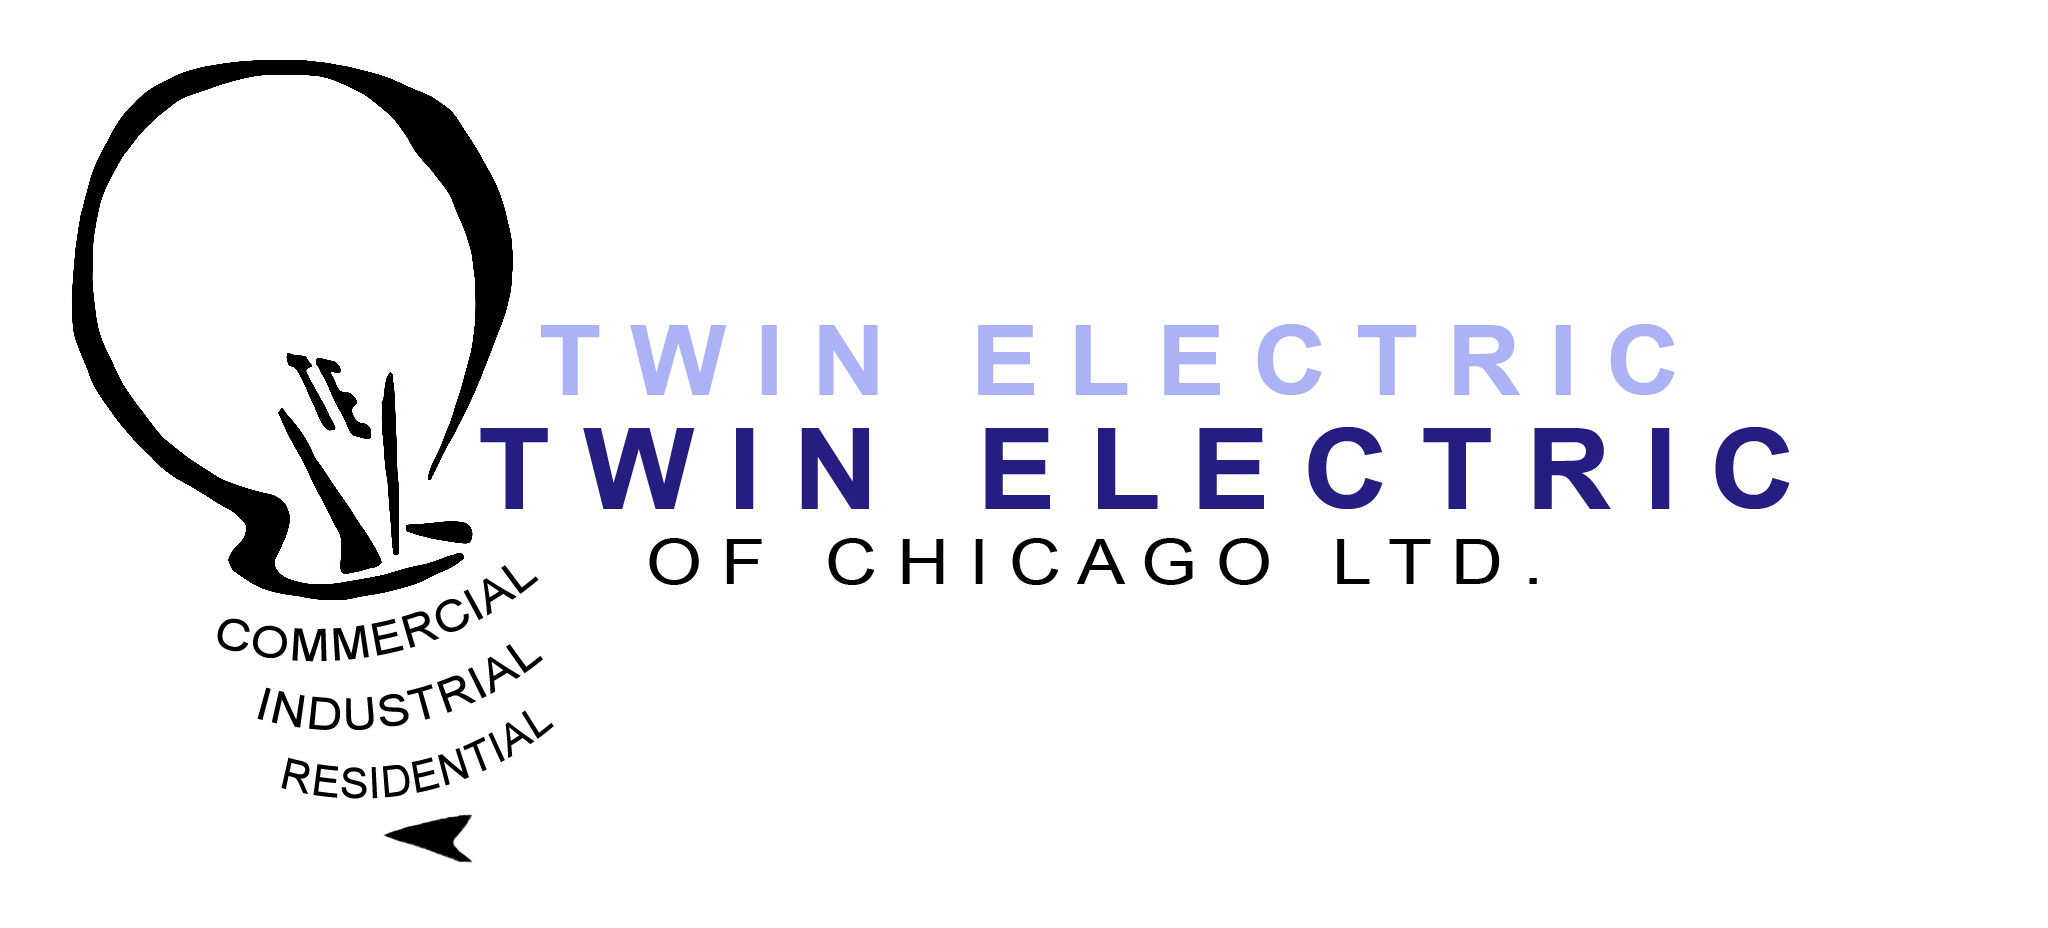 Twin Electric of Chicago, Ltd.